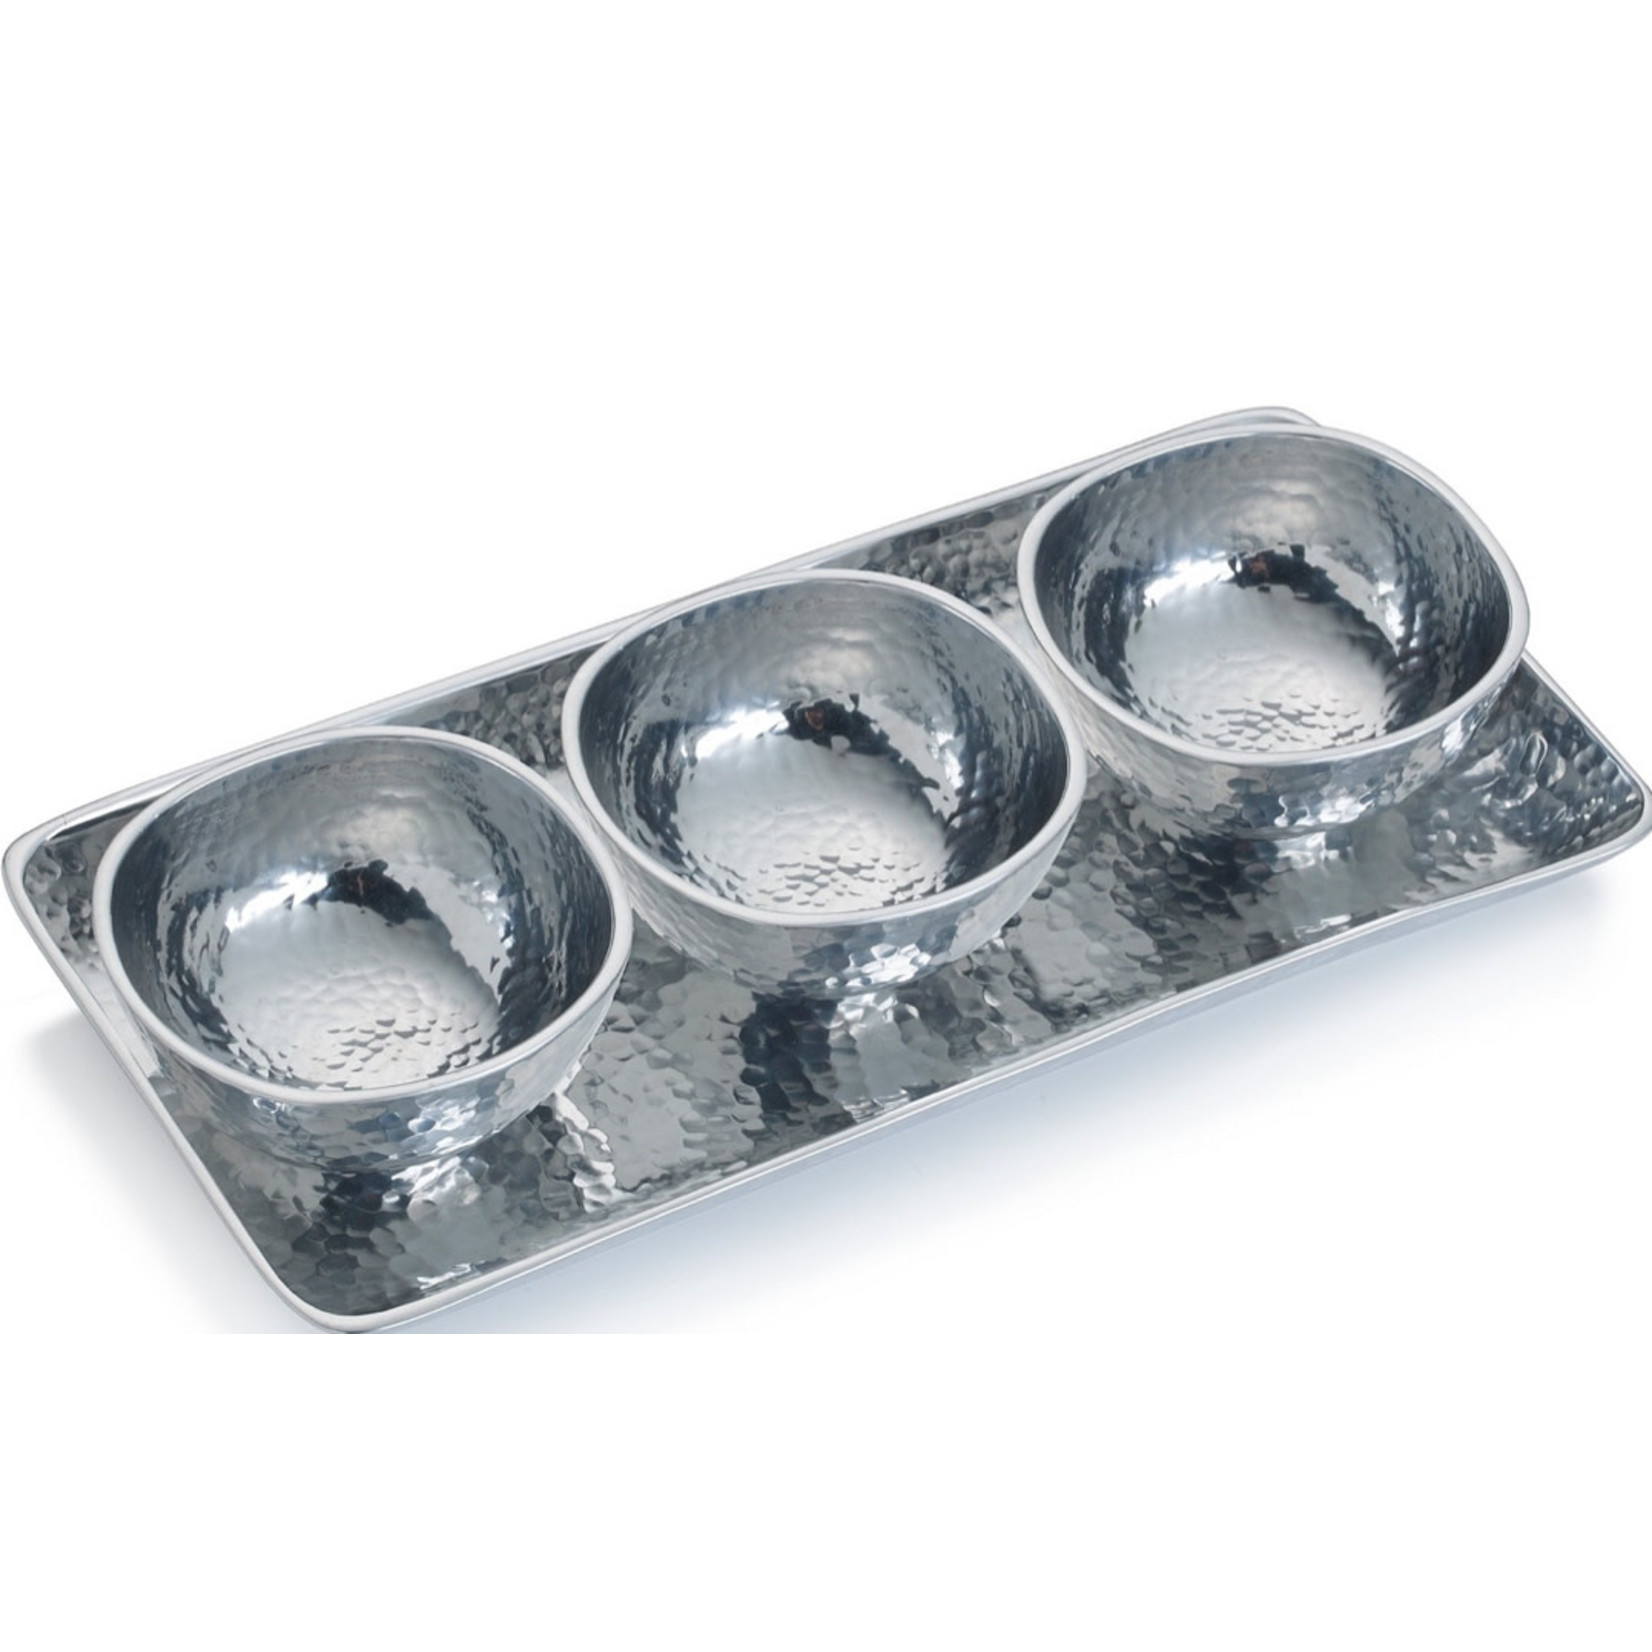 Lifetime Brands Towle Hammersmith Set/3 Bowls on Tray